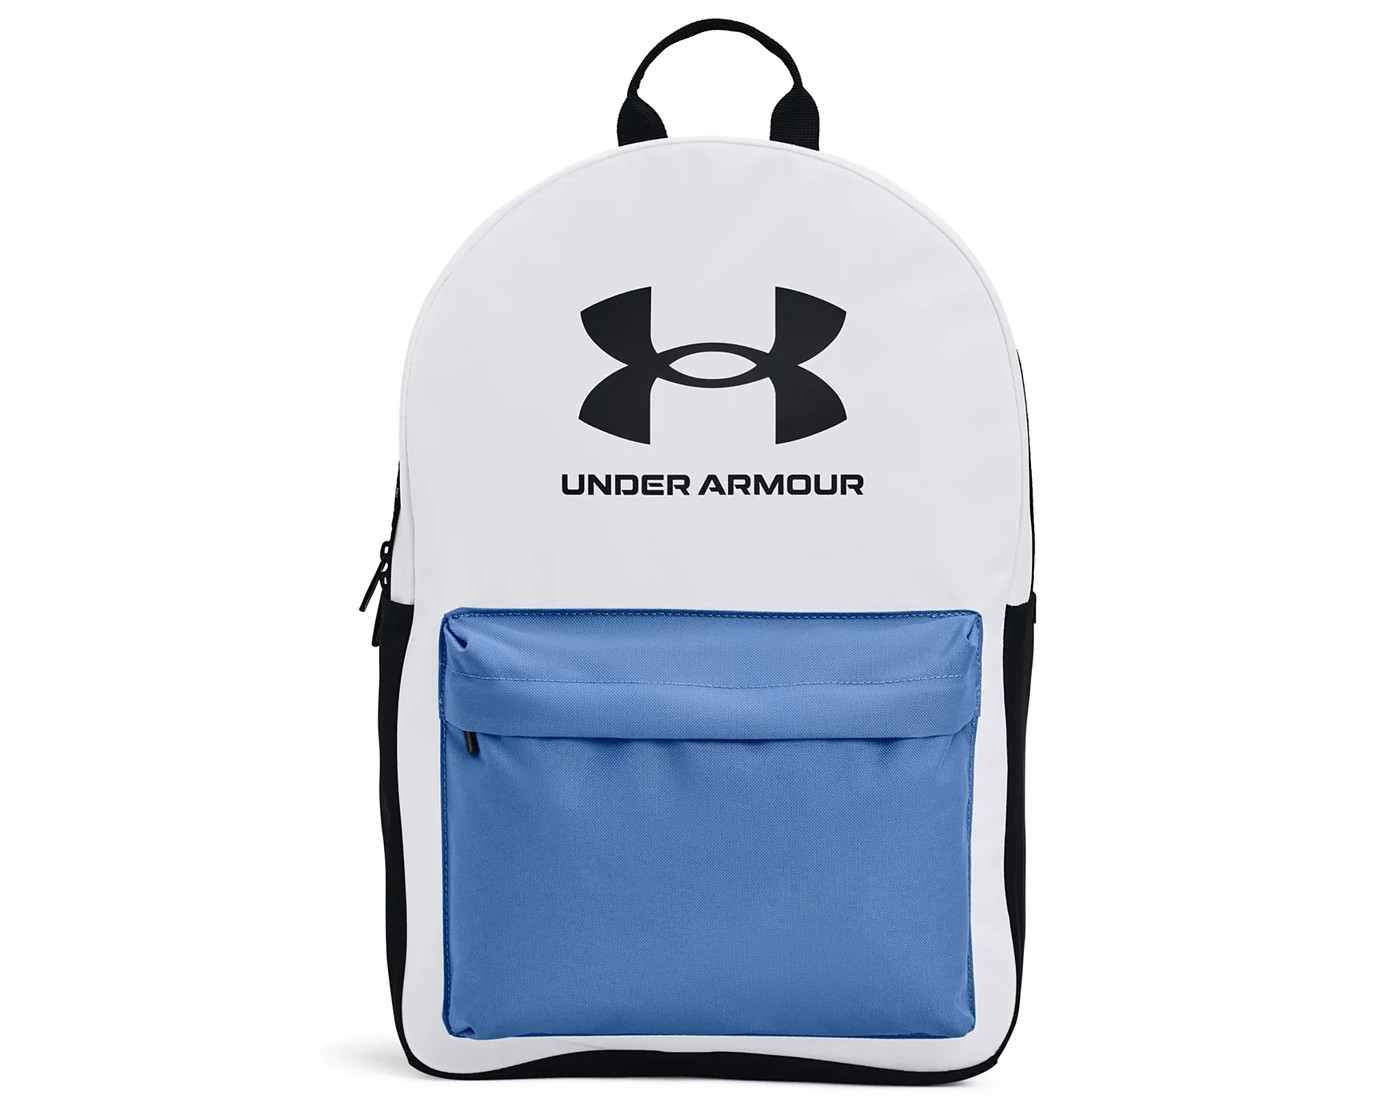 kohls-under-armour-clearance-backpack-2021-2